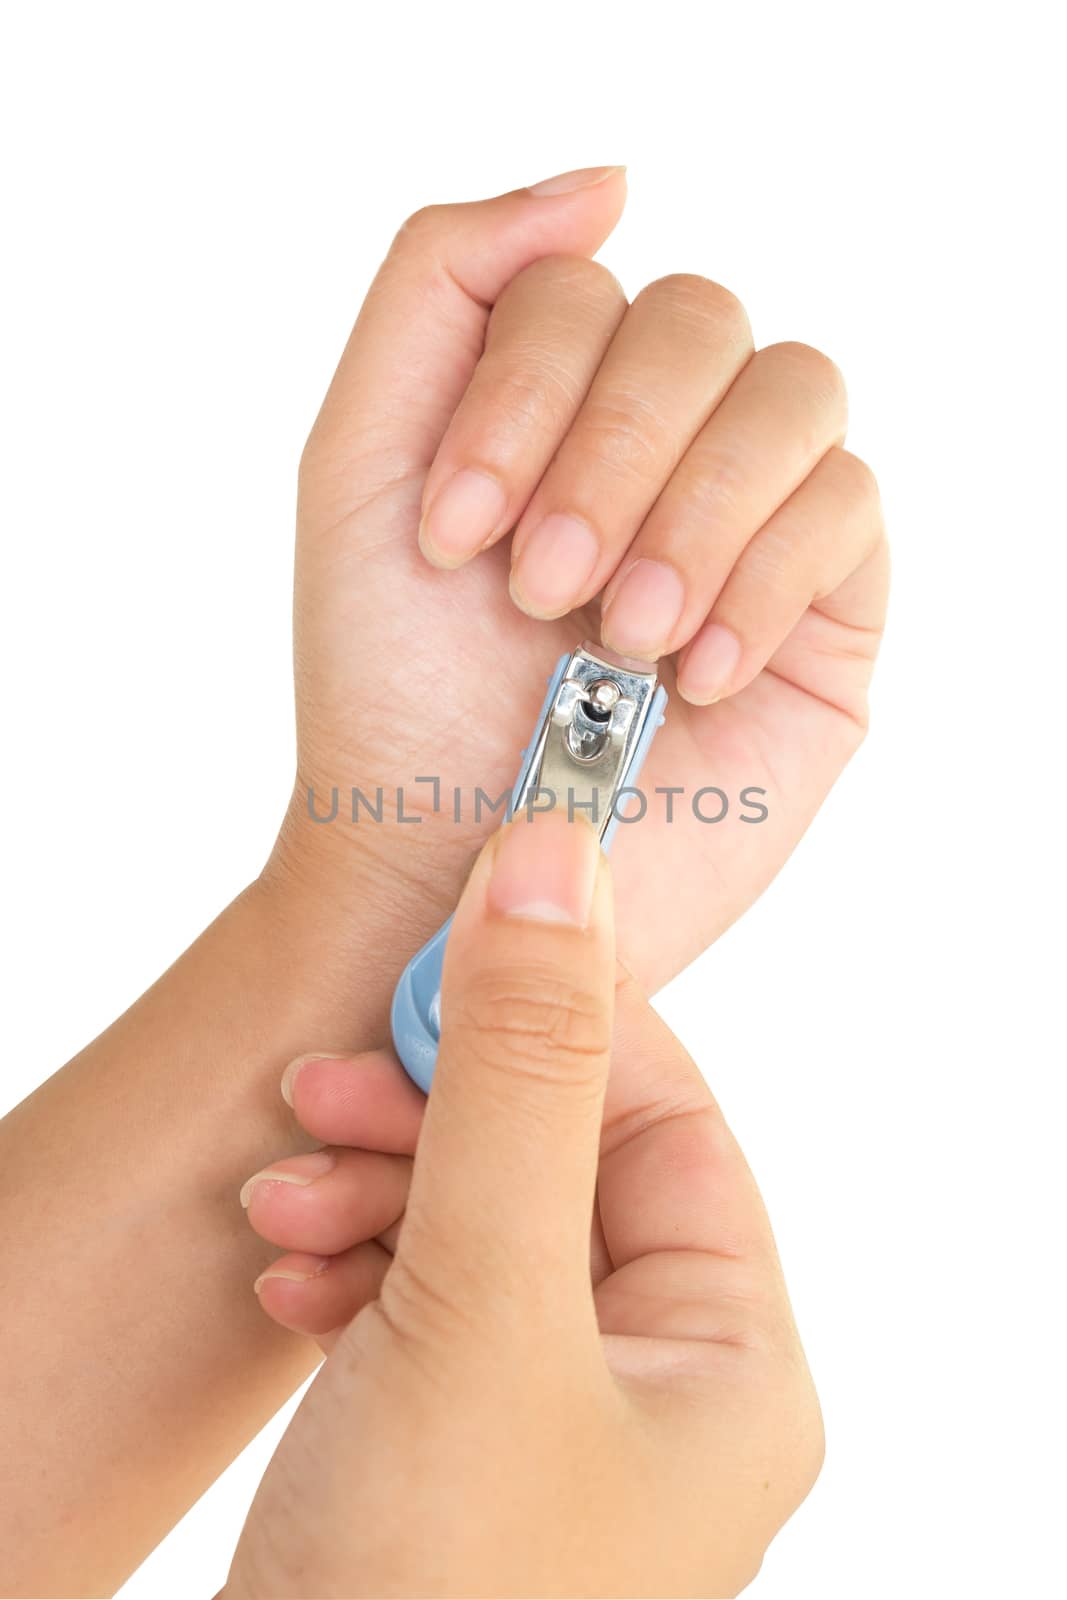 Hand manicure with nail clipper on white background.